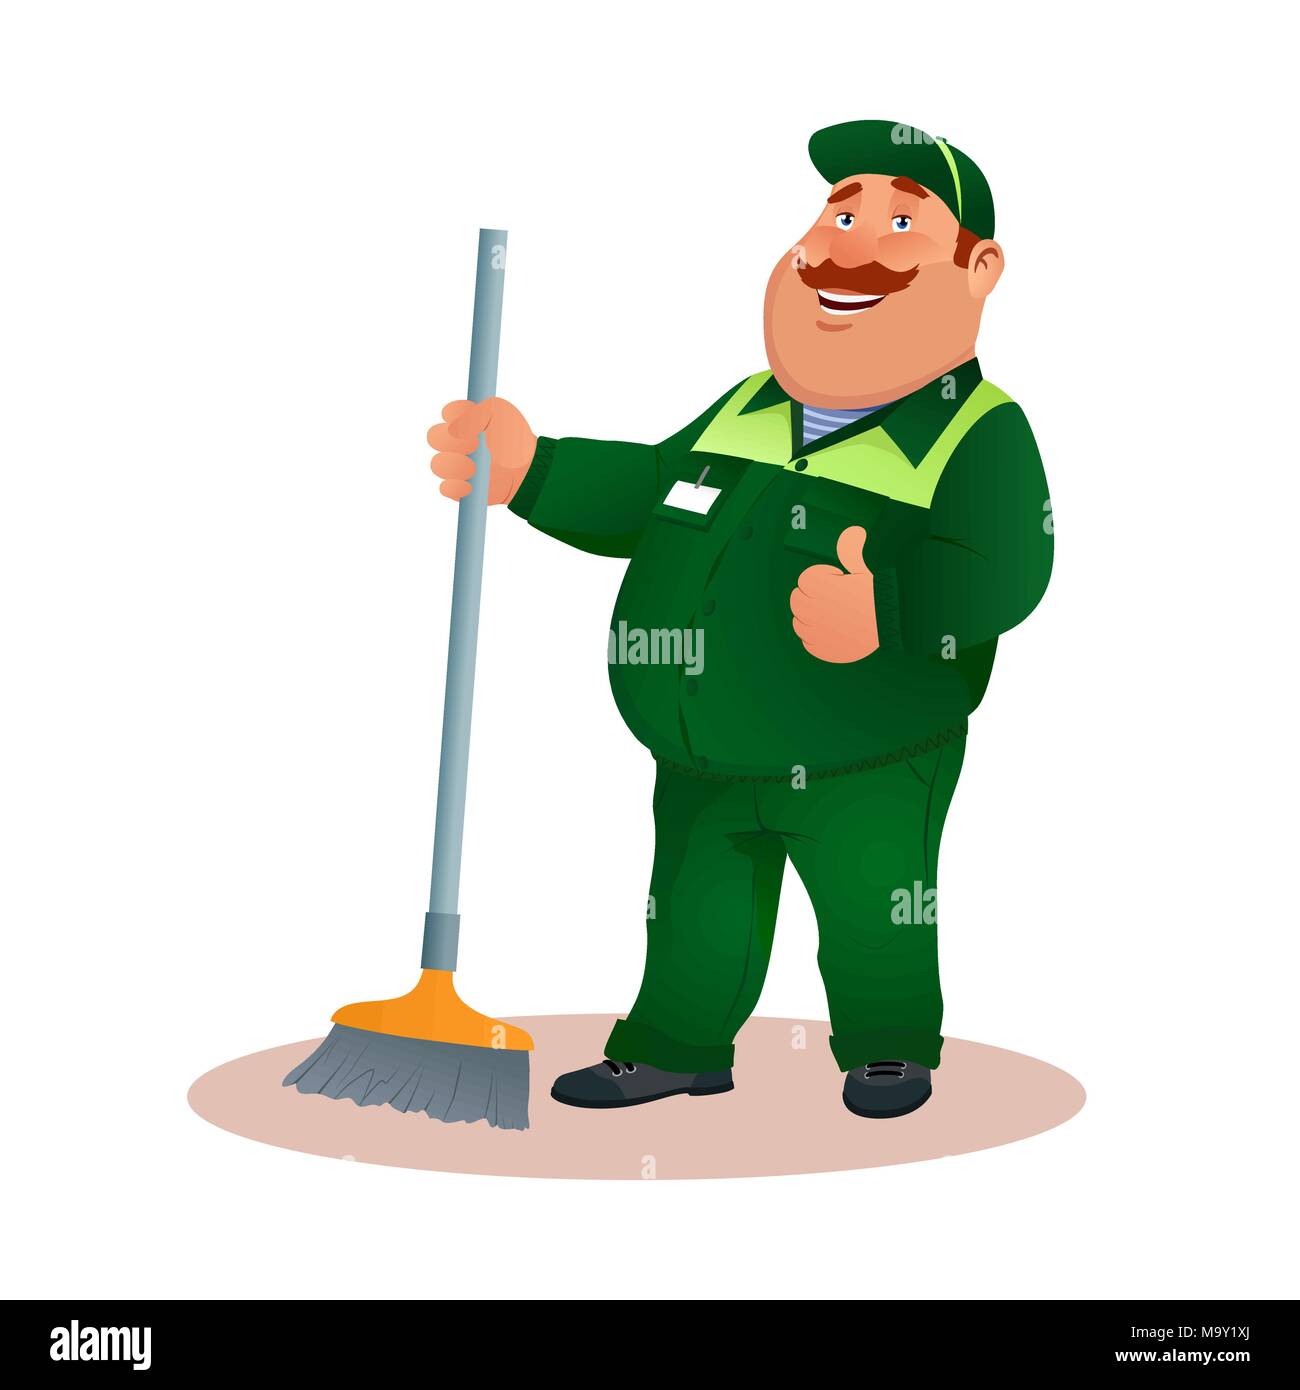 Happy flat cleaner in uniform from janitorial service or office cleaning. Funny cartoon janitor with mop and ok gesture. Smiling fat character in green suit with broom. Colorful vector illustration. Stock Vector